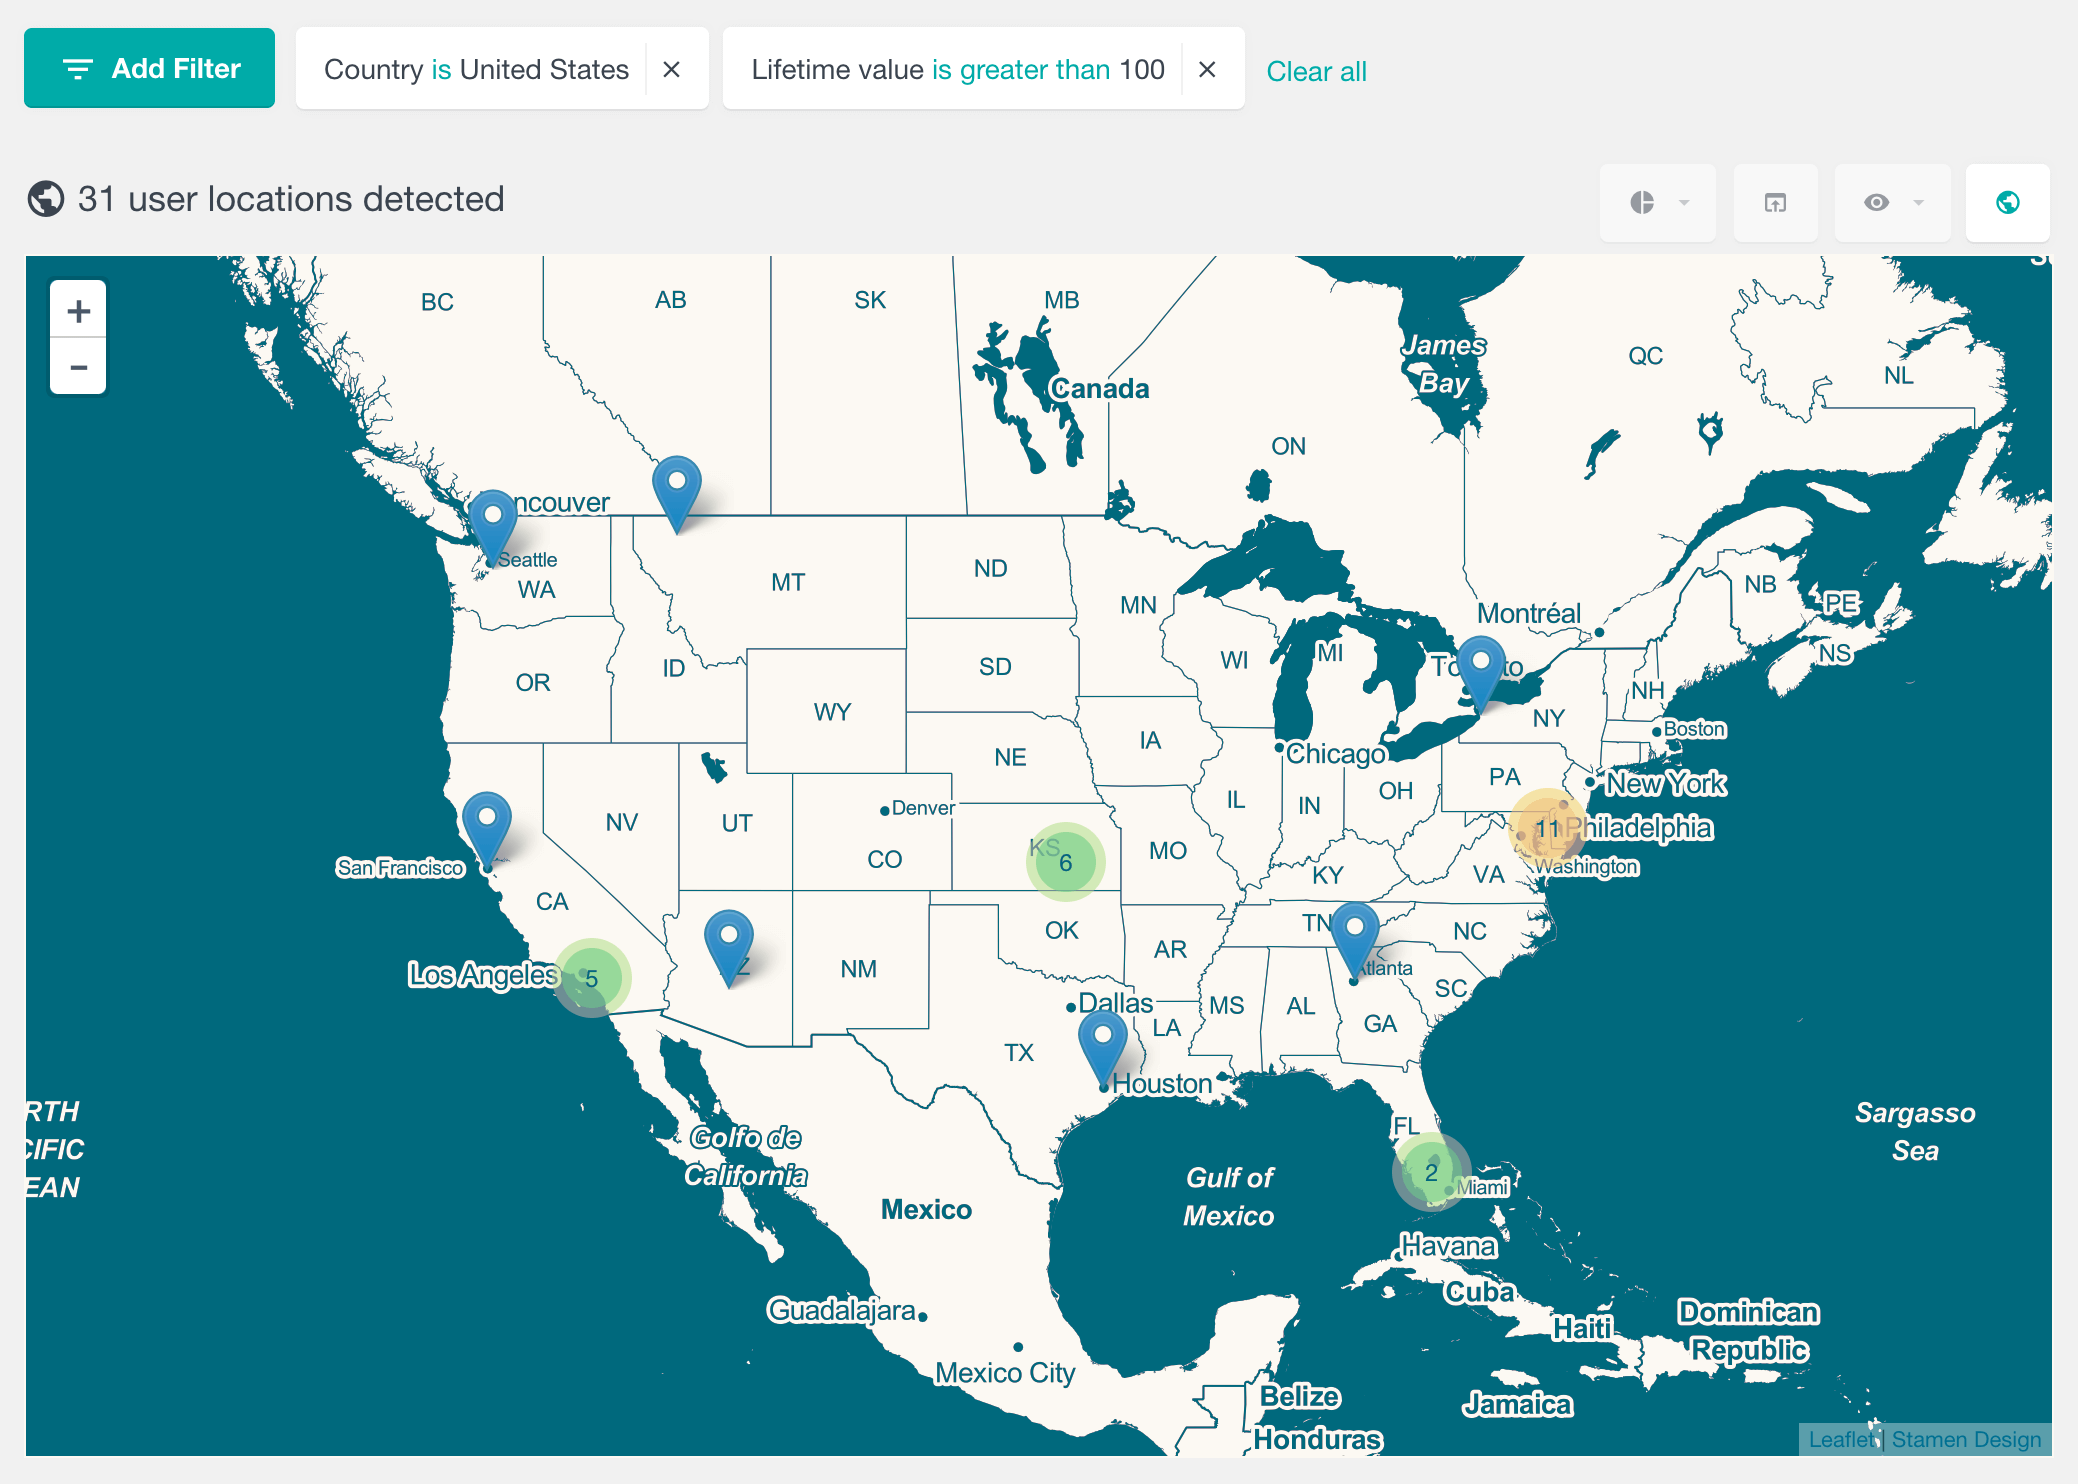 wordpress user location map with filters